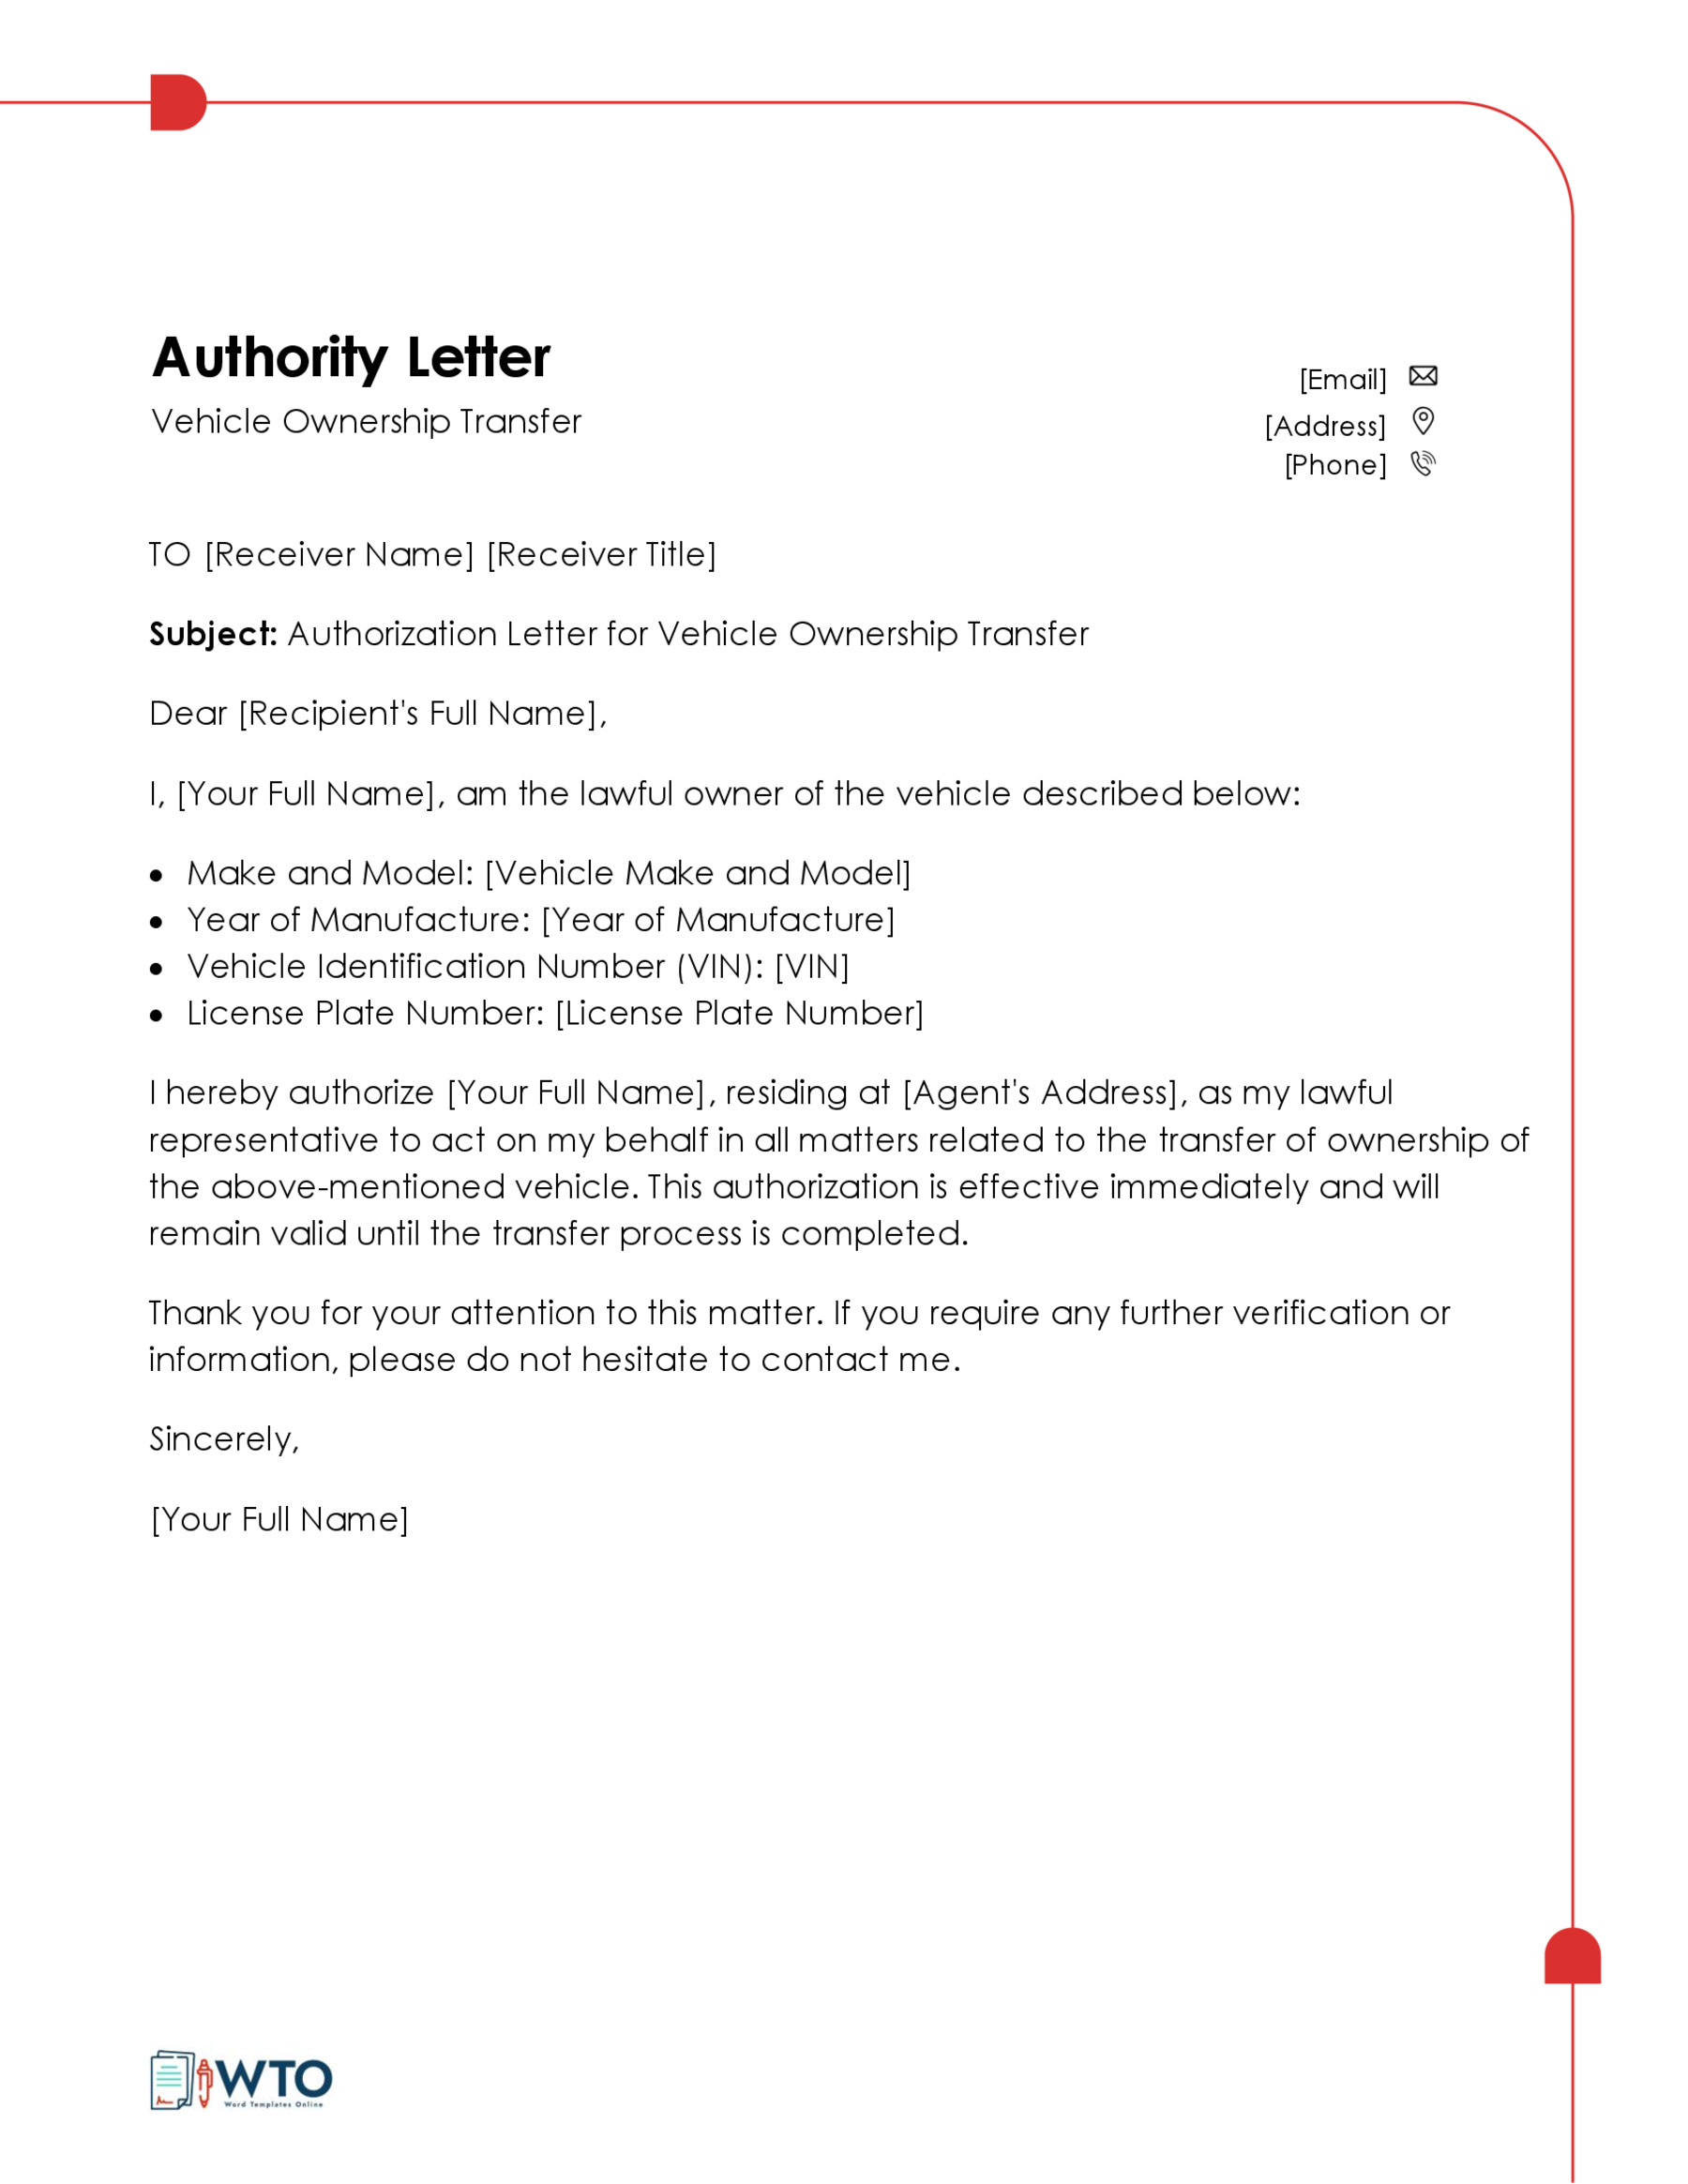 Authorization Letter Transfer Vehicle Ownership Letter Template-Free download